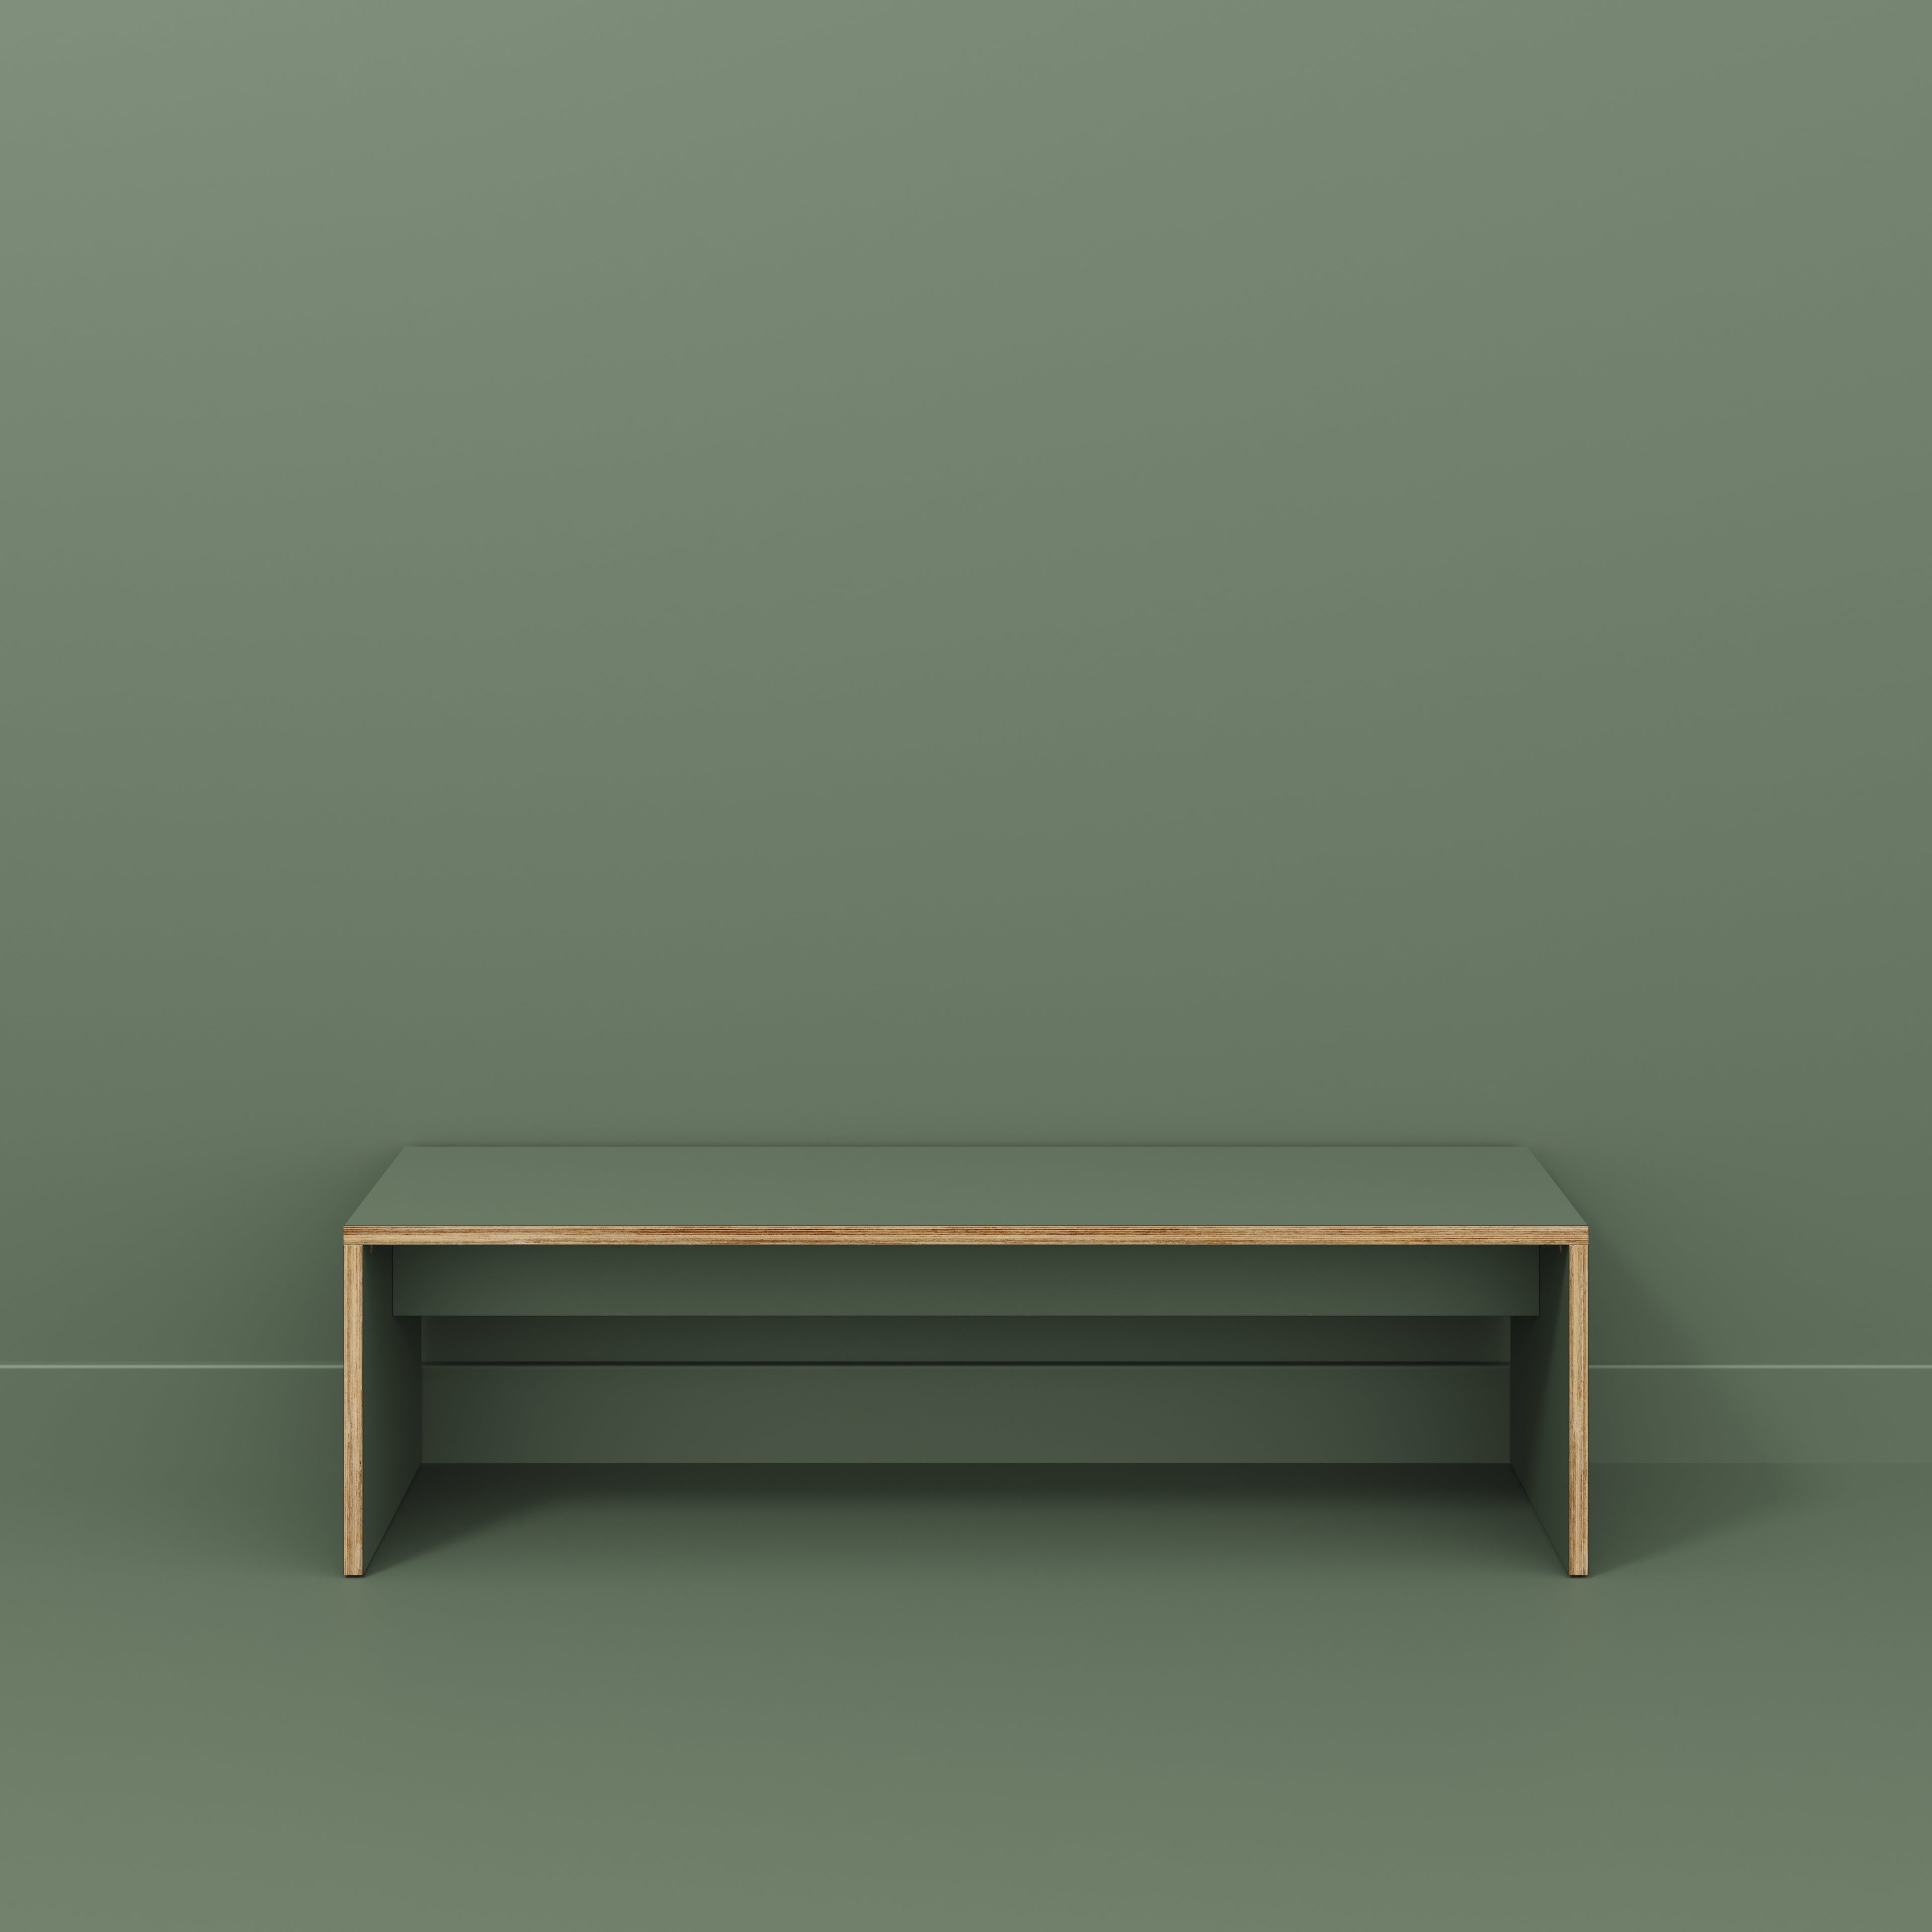 Bench Seat with Solid Sides - Formica Green Slate - 1600(w) x 400(d)